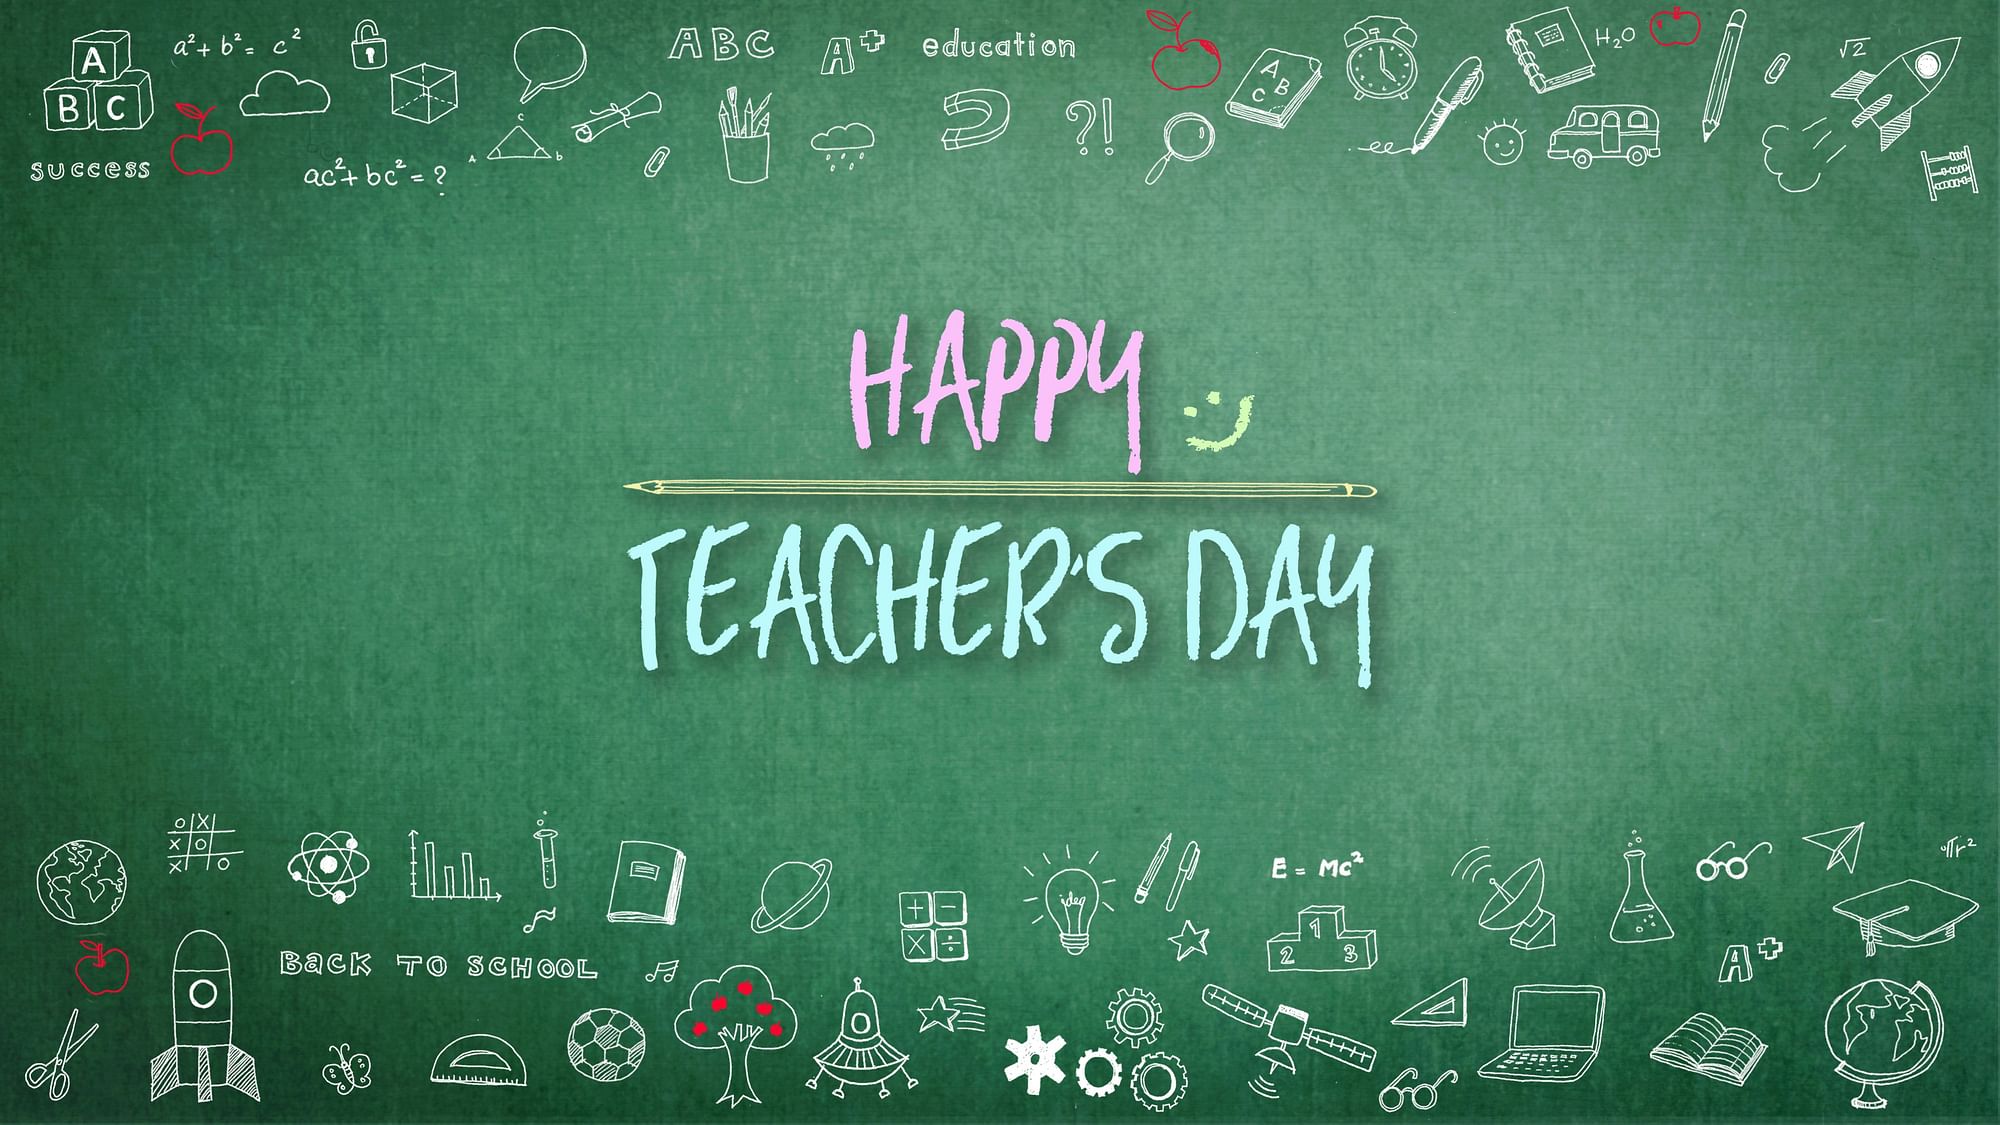 Happy Teachers’ Day Greetings 2020: Here are some wishes, images &amp; quotes to send your teachers today.